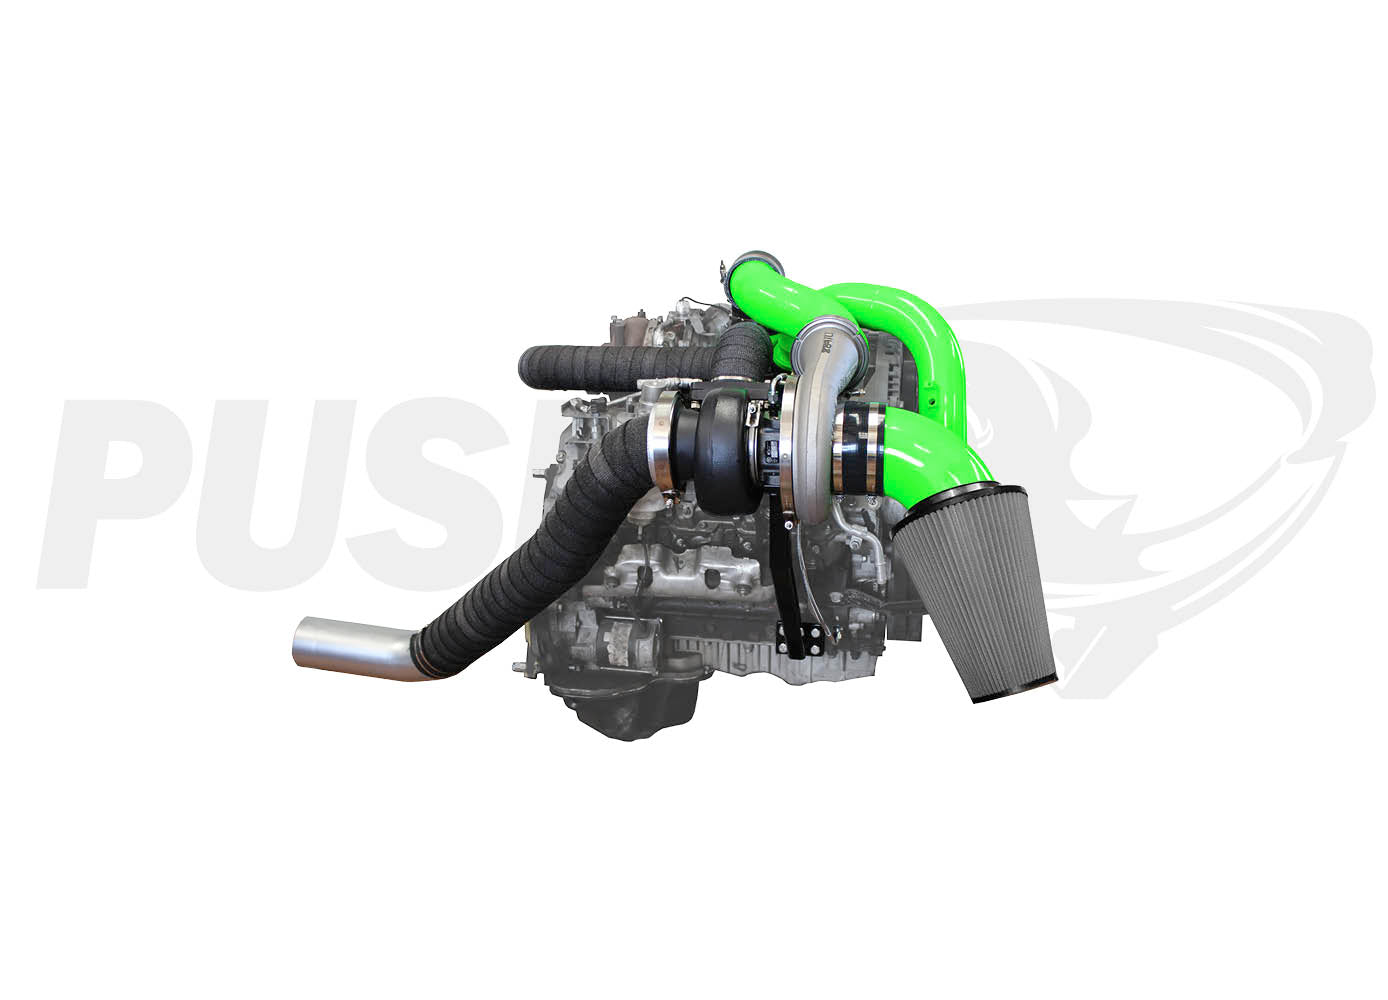 Pusher Max Compound Turbo System for 2007.5-2010 Duramax LMM Trucks